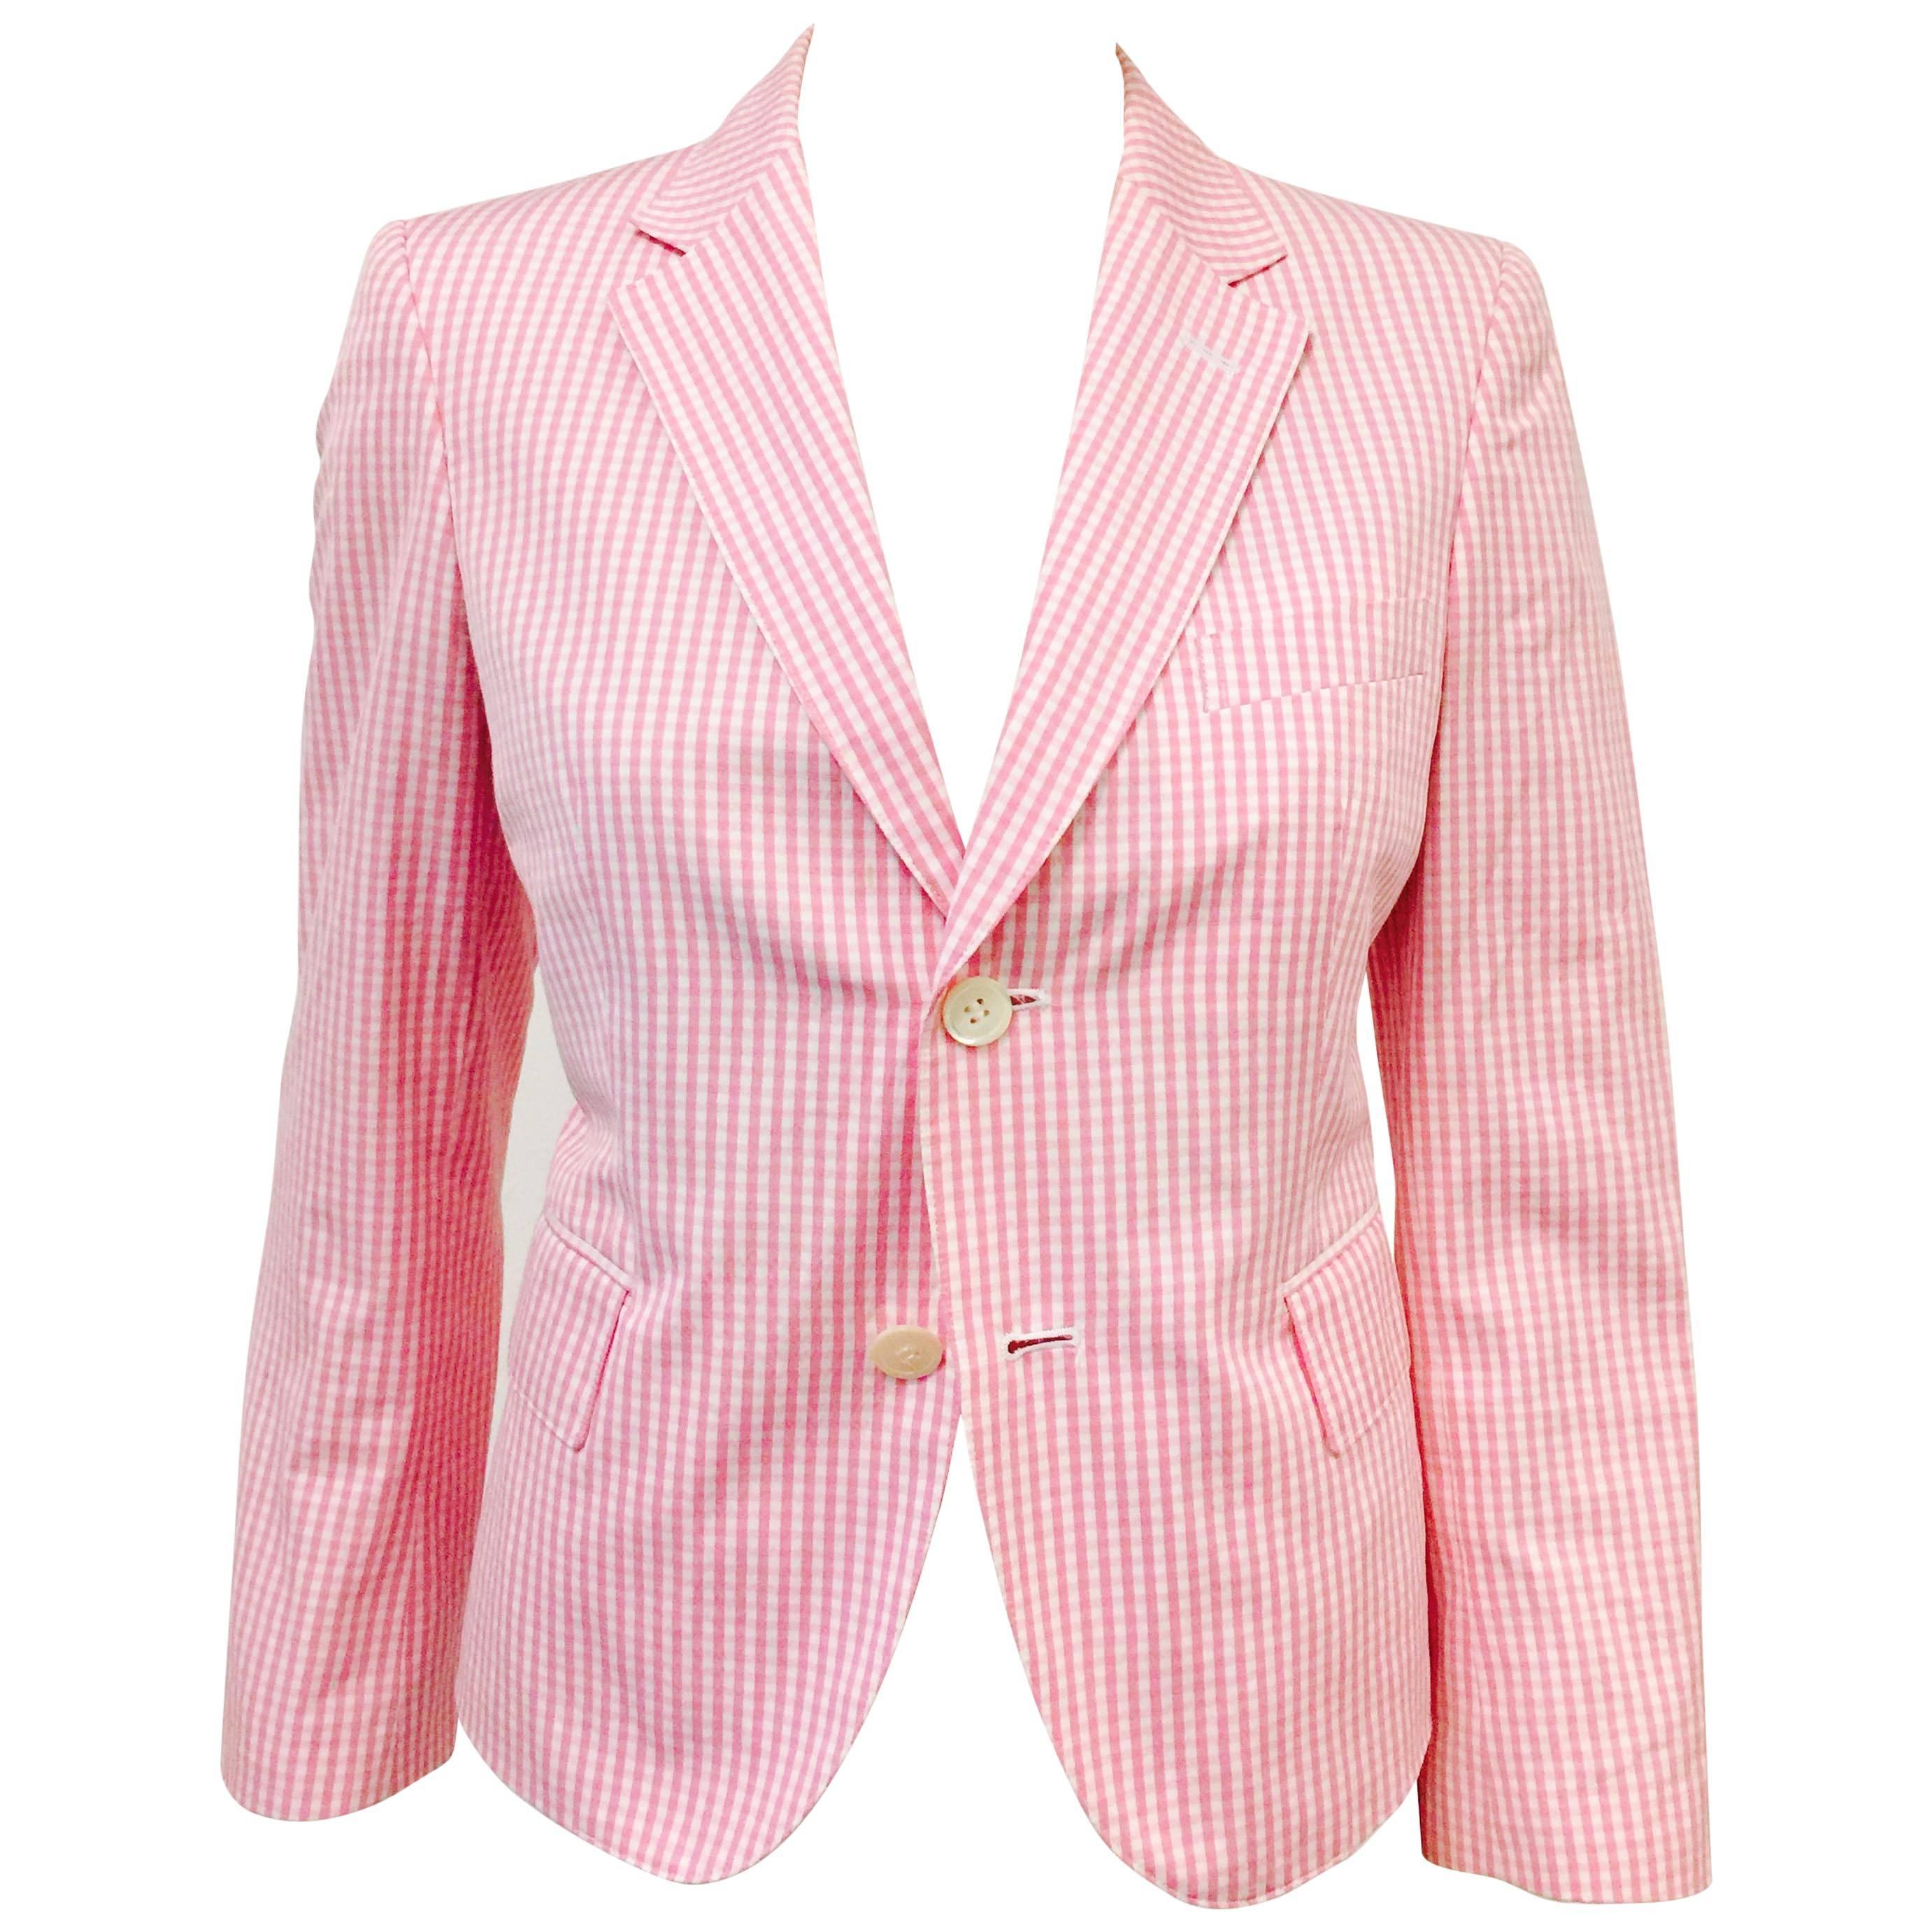 Comme des Garcons by Junya Watanabe Pink and White Gingham Blazer